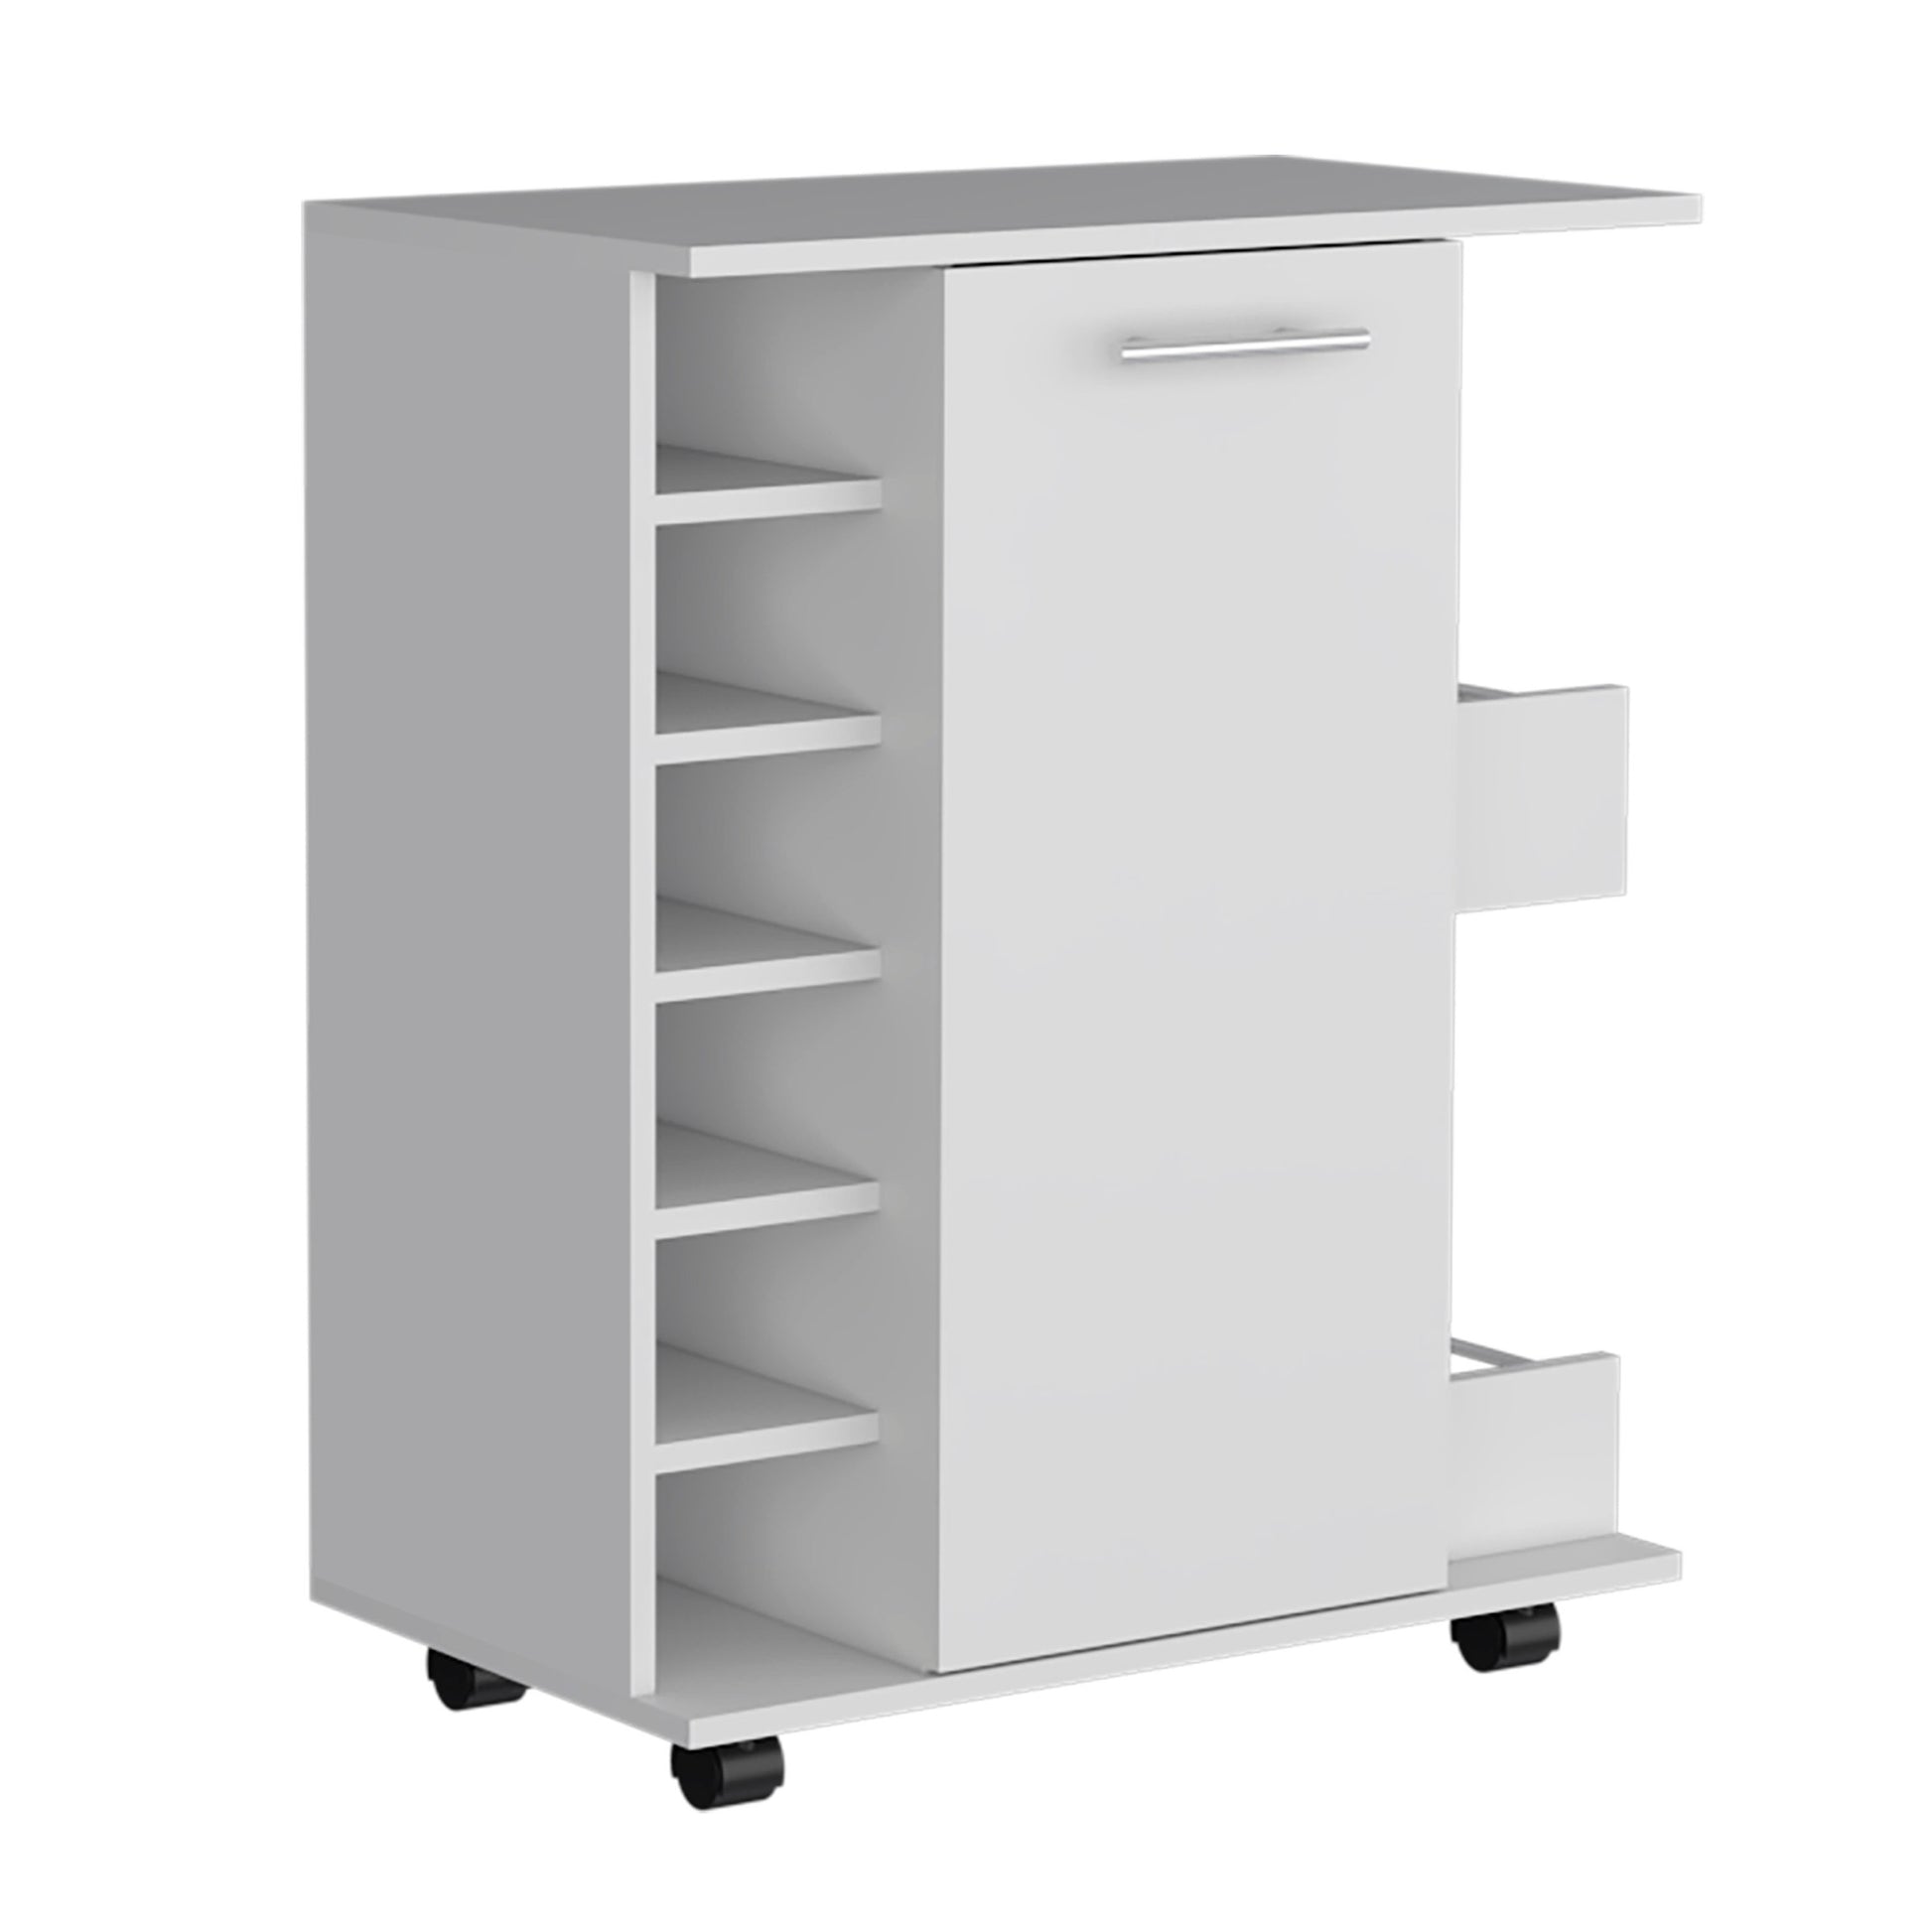 White 4 Wheel Bar Cart Cabinet For Kitchen Or